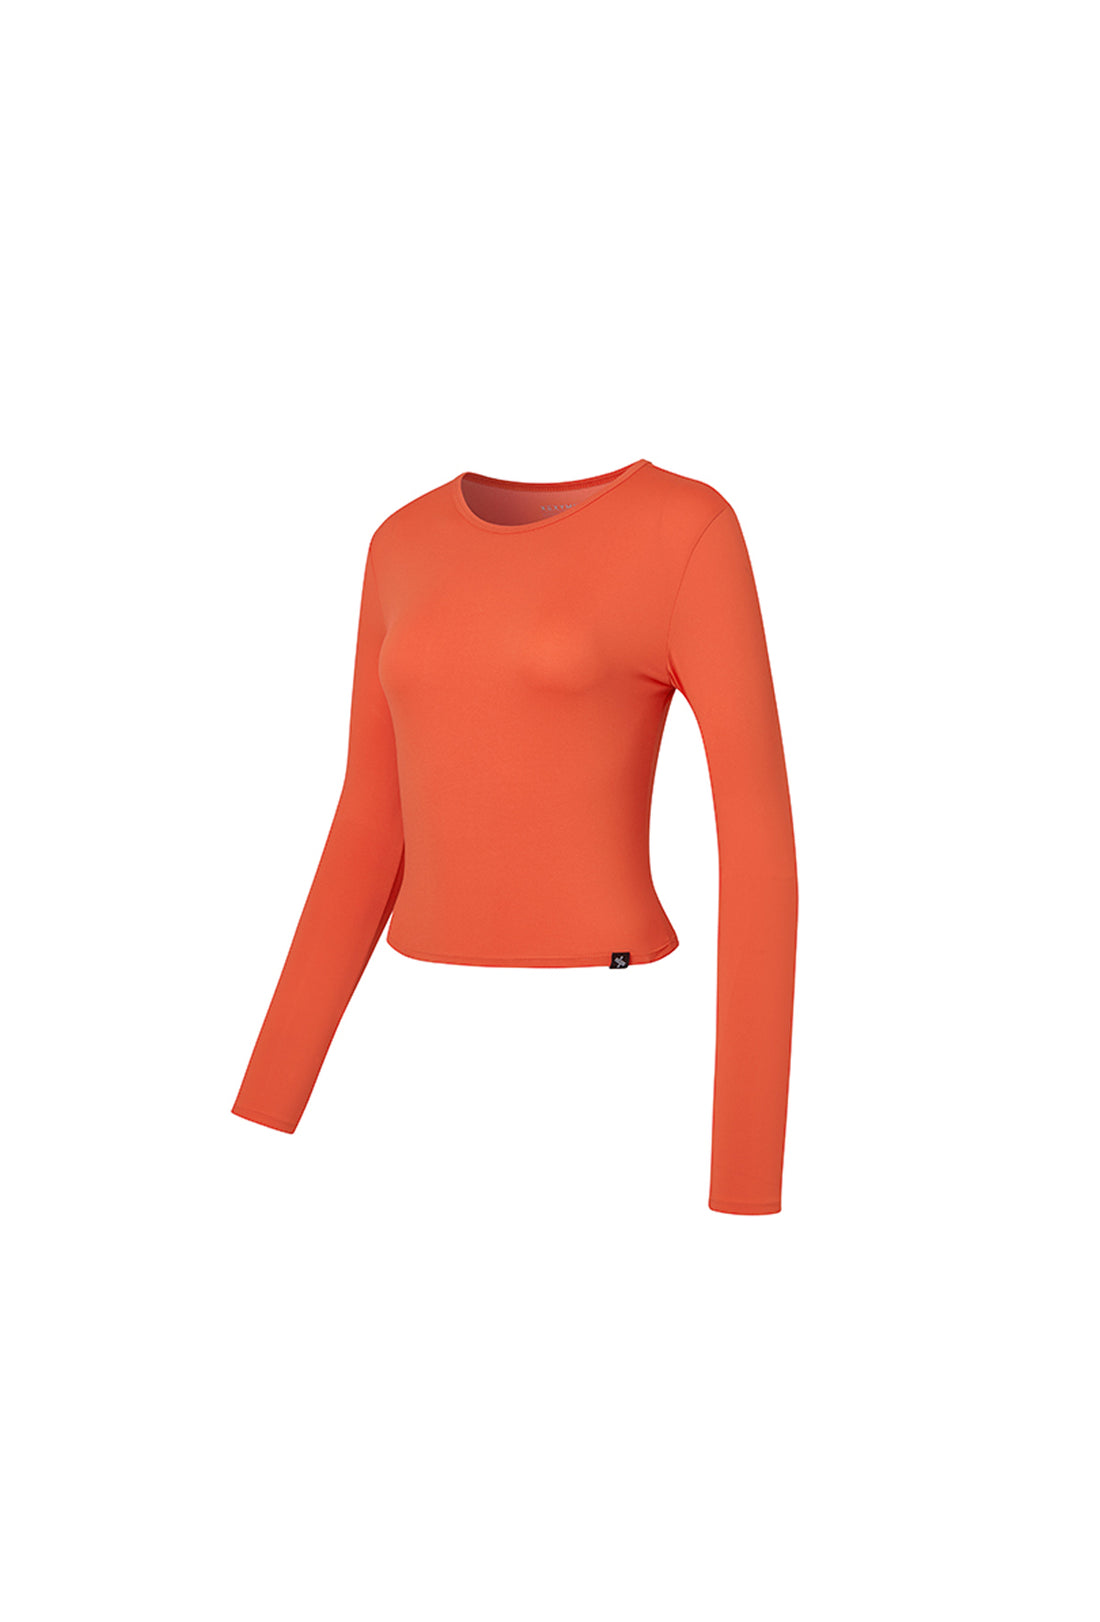 All Day Feather Crop Top - Orange Pop (Clearance)